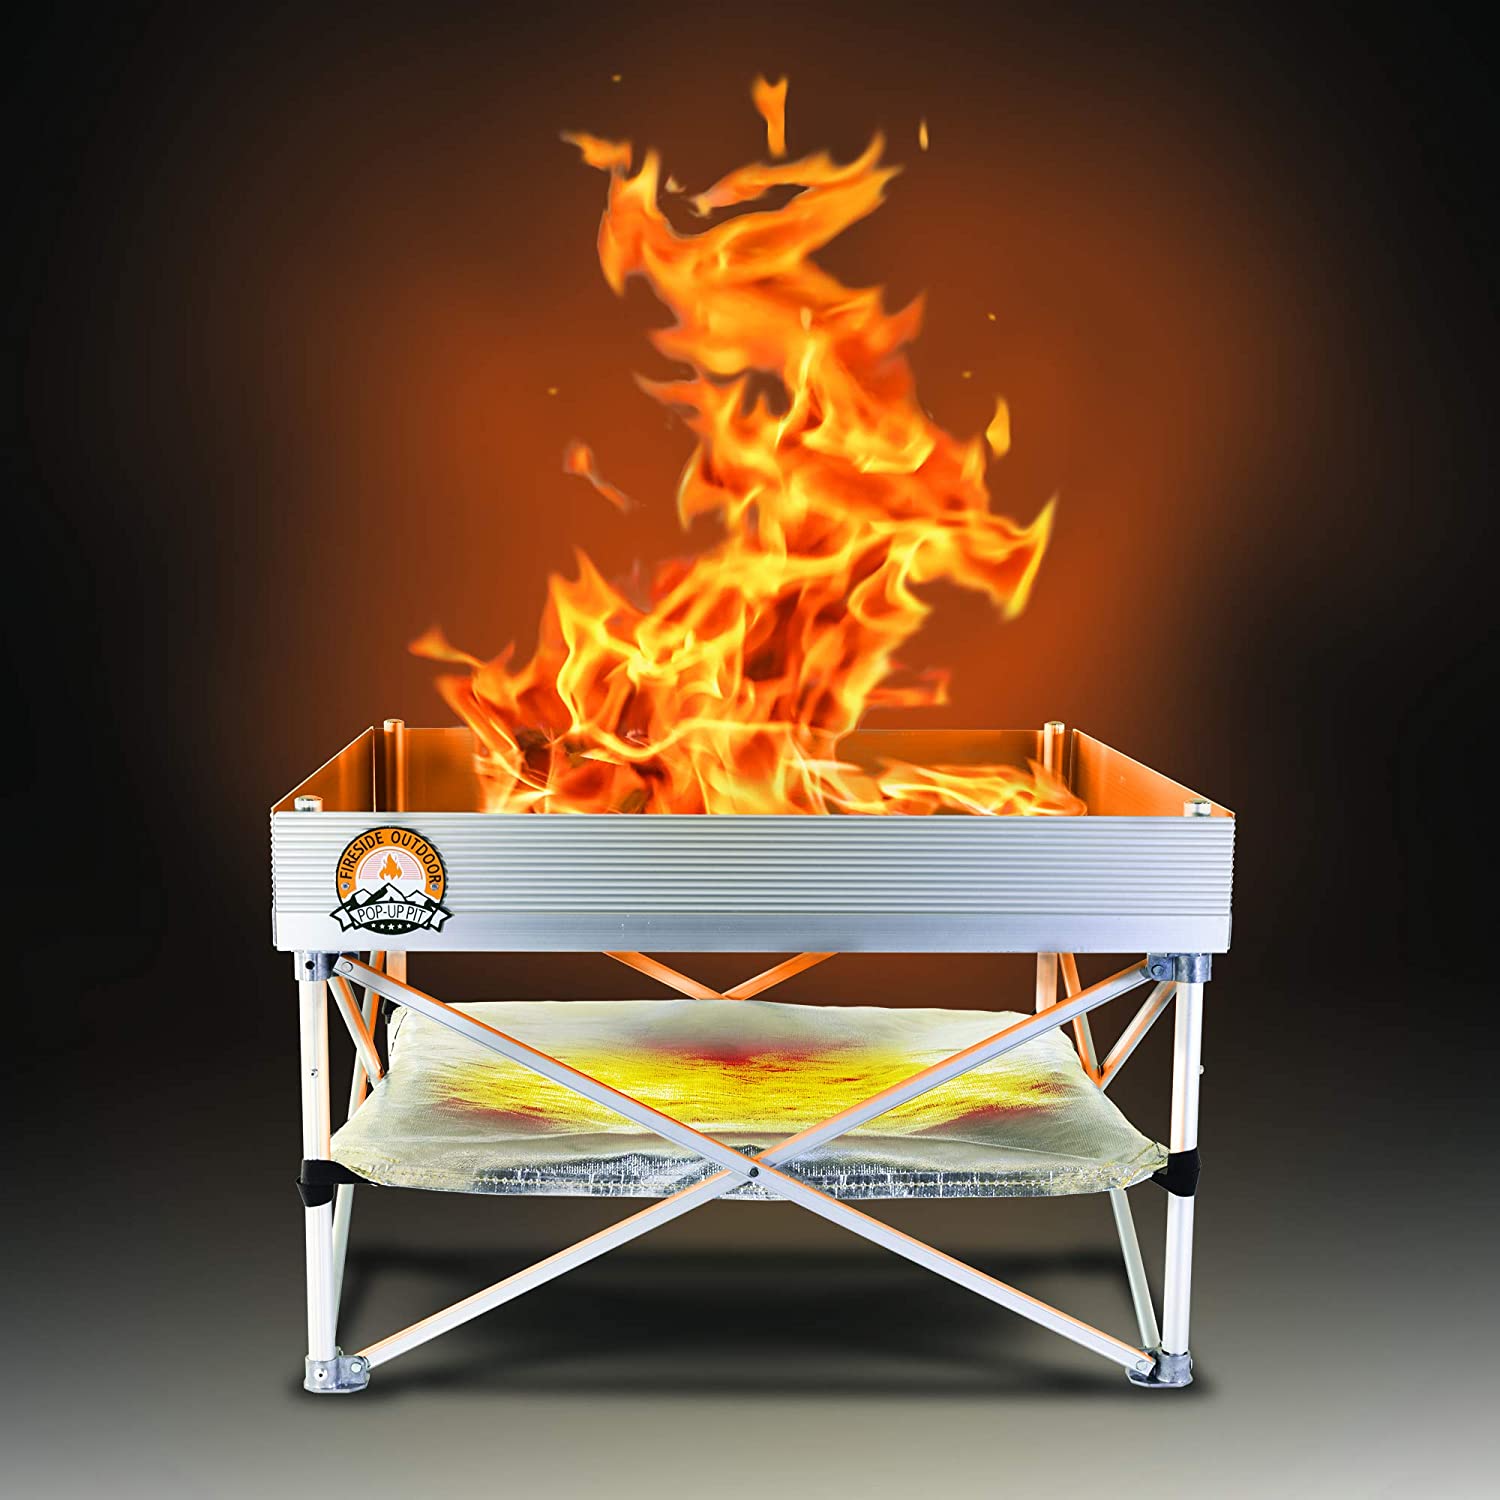 UK's best portable fire pit for camping and beaches: gas, wood, oil »  Shetland's Garden Tool Box